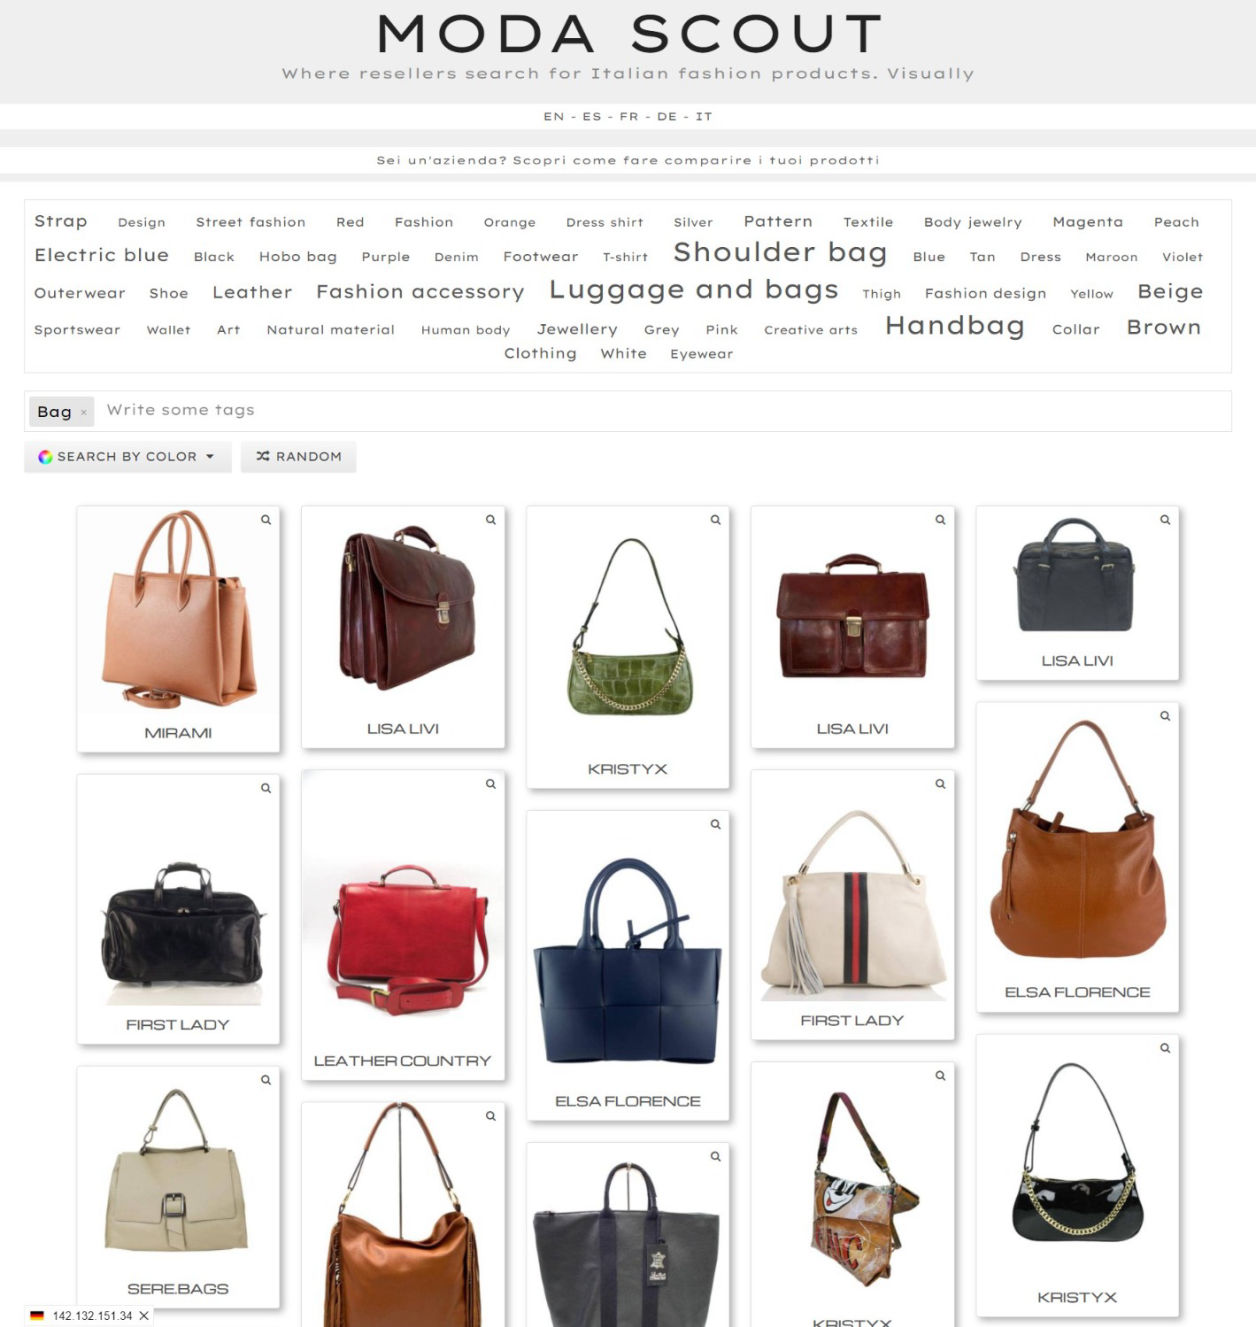 Visual image search engine of Italian bags B2B: find the best Made in Italy handbags